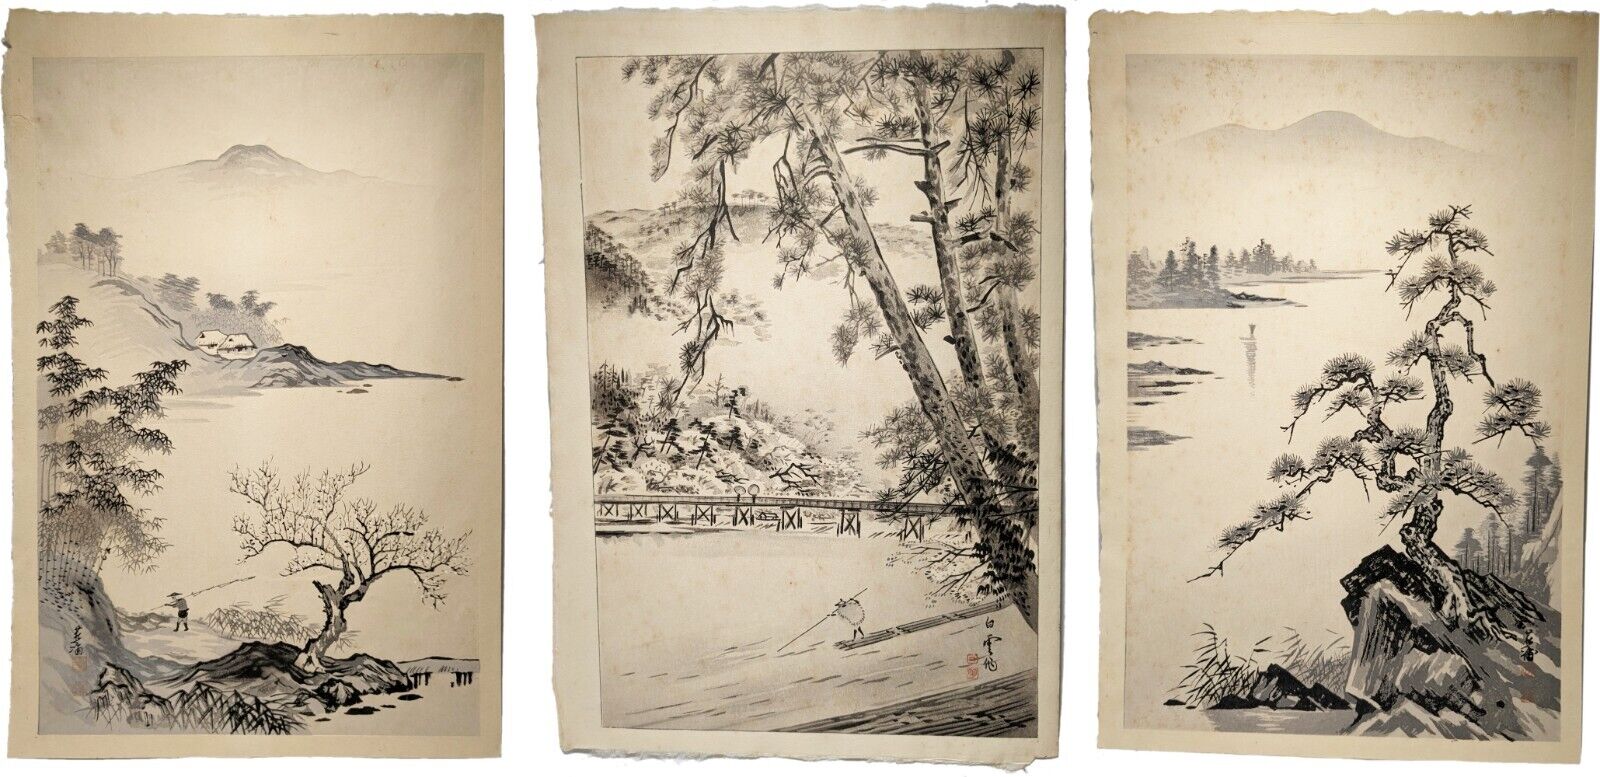 IMOTO TEKIHO Japanese woodblock prints lot of 3 tanned paper foxing spots